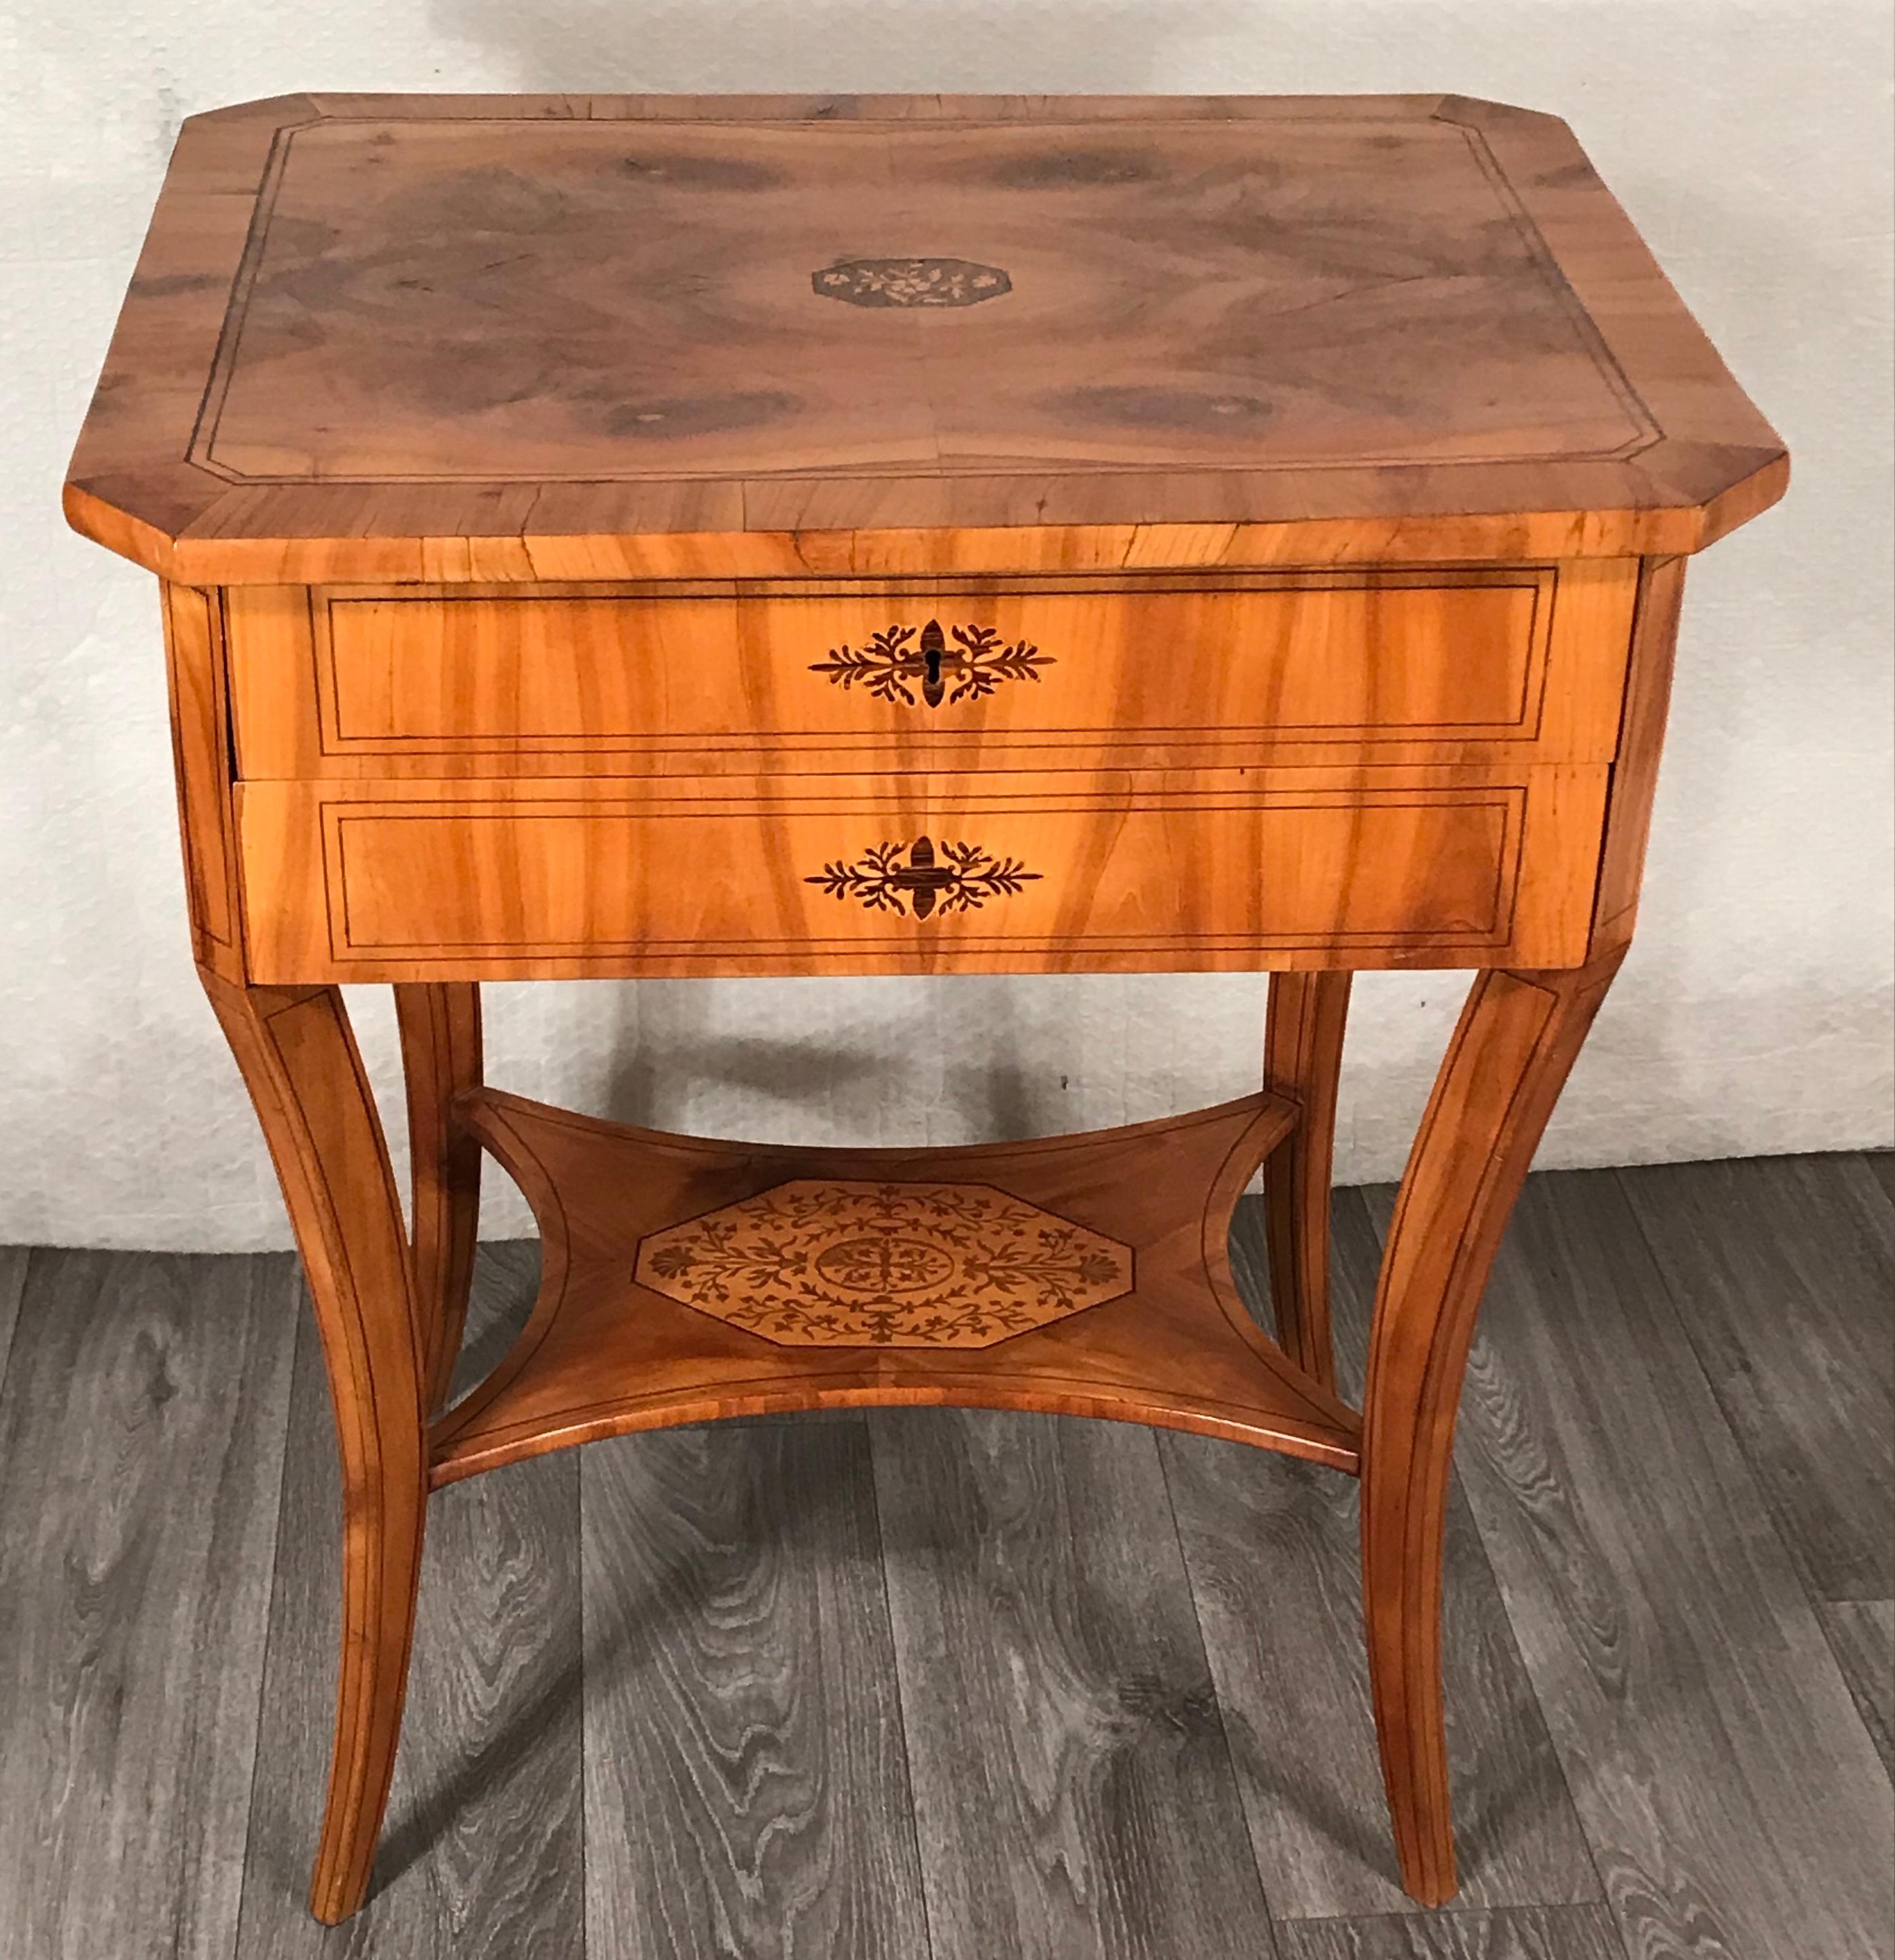 Biedermeier sewing table, South German 1820-25. 
Cherry veneer with beautiful floral marquetry details in maple and plum wood. The sewing table has two drawers, the inside of one of them has several compartments and a flippable pin cushion. The